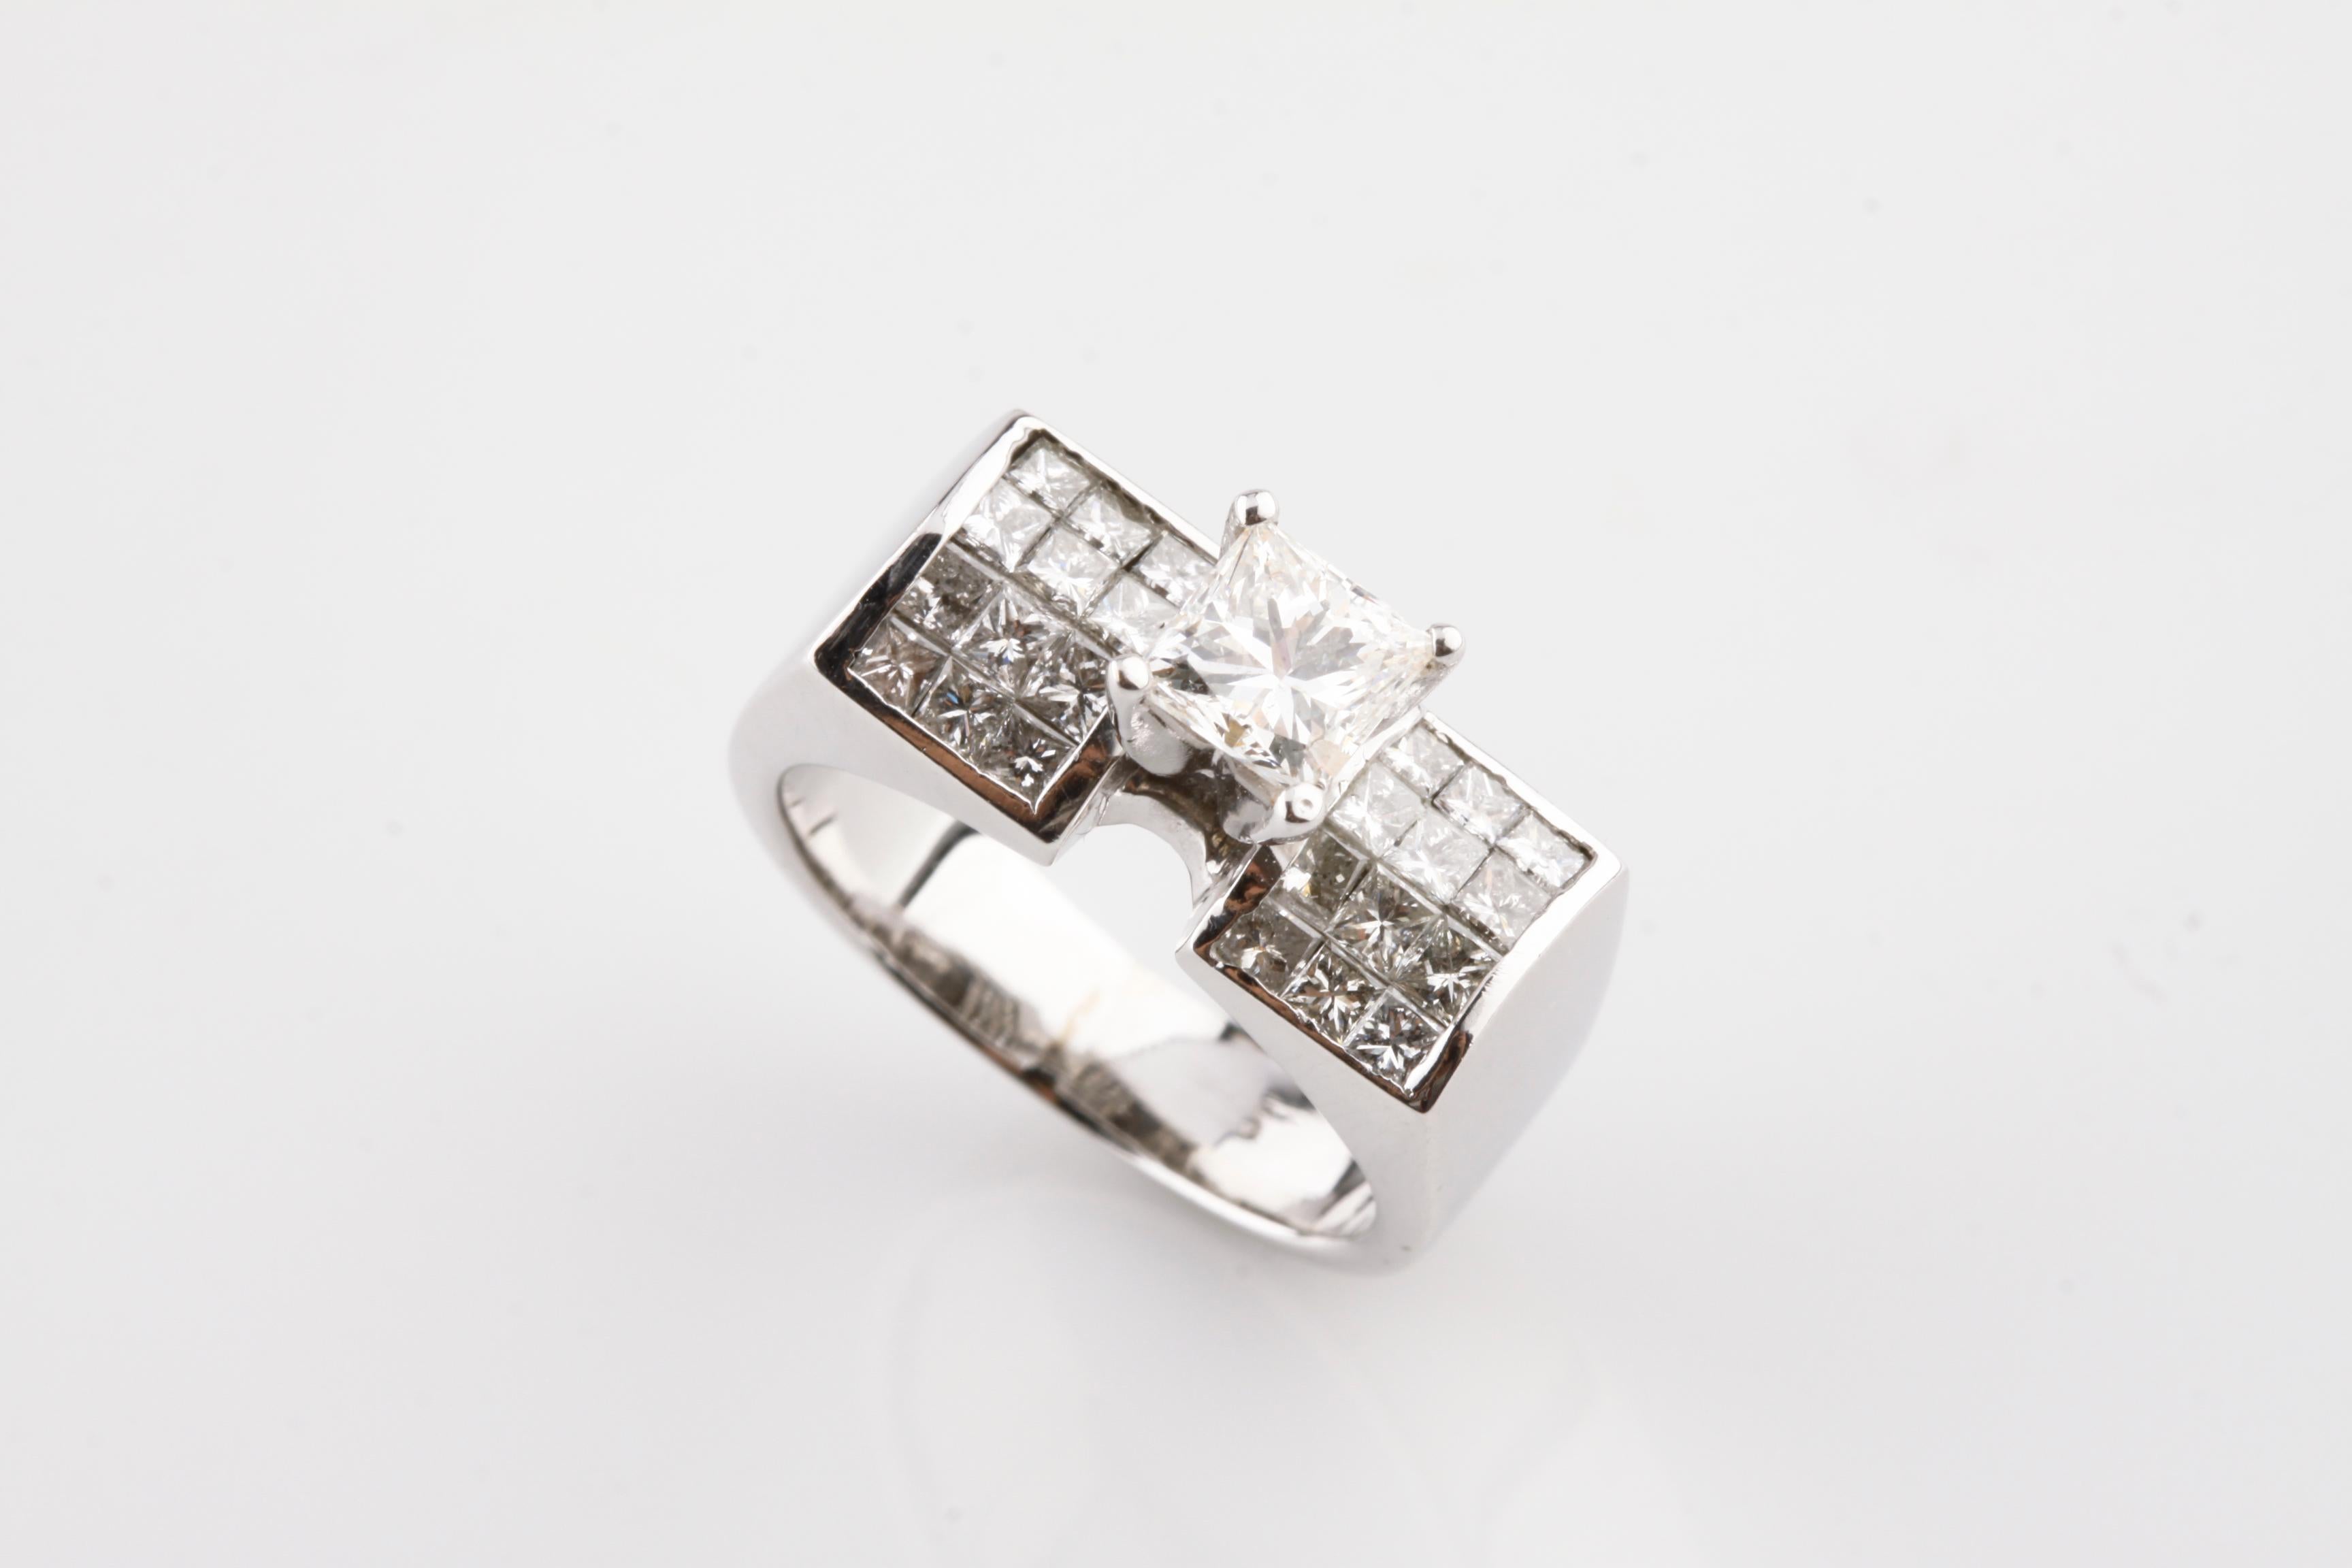 One electronically tested 18KT white gold ladies cast diamond ring with a bright finish
Condition is new, good workmanship.
The ring Features a diamond solitaire, supported by diamonds set shoulders, completed by a four and one-half millimeter wide